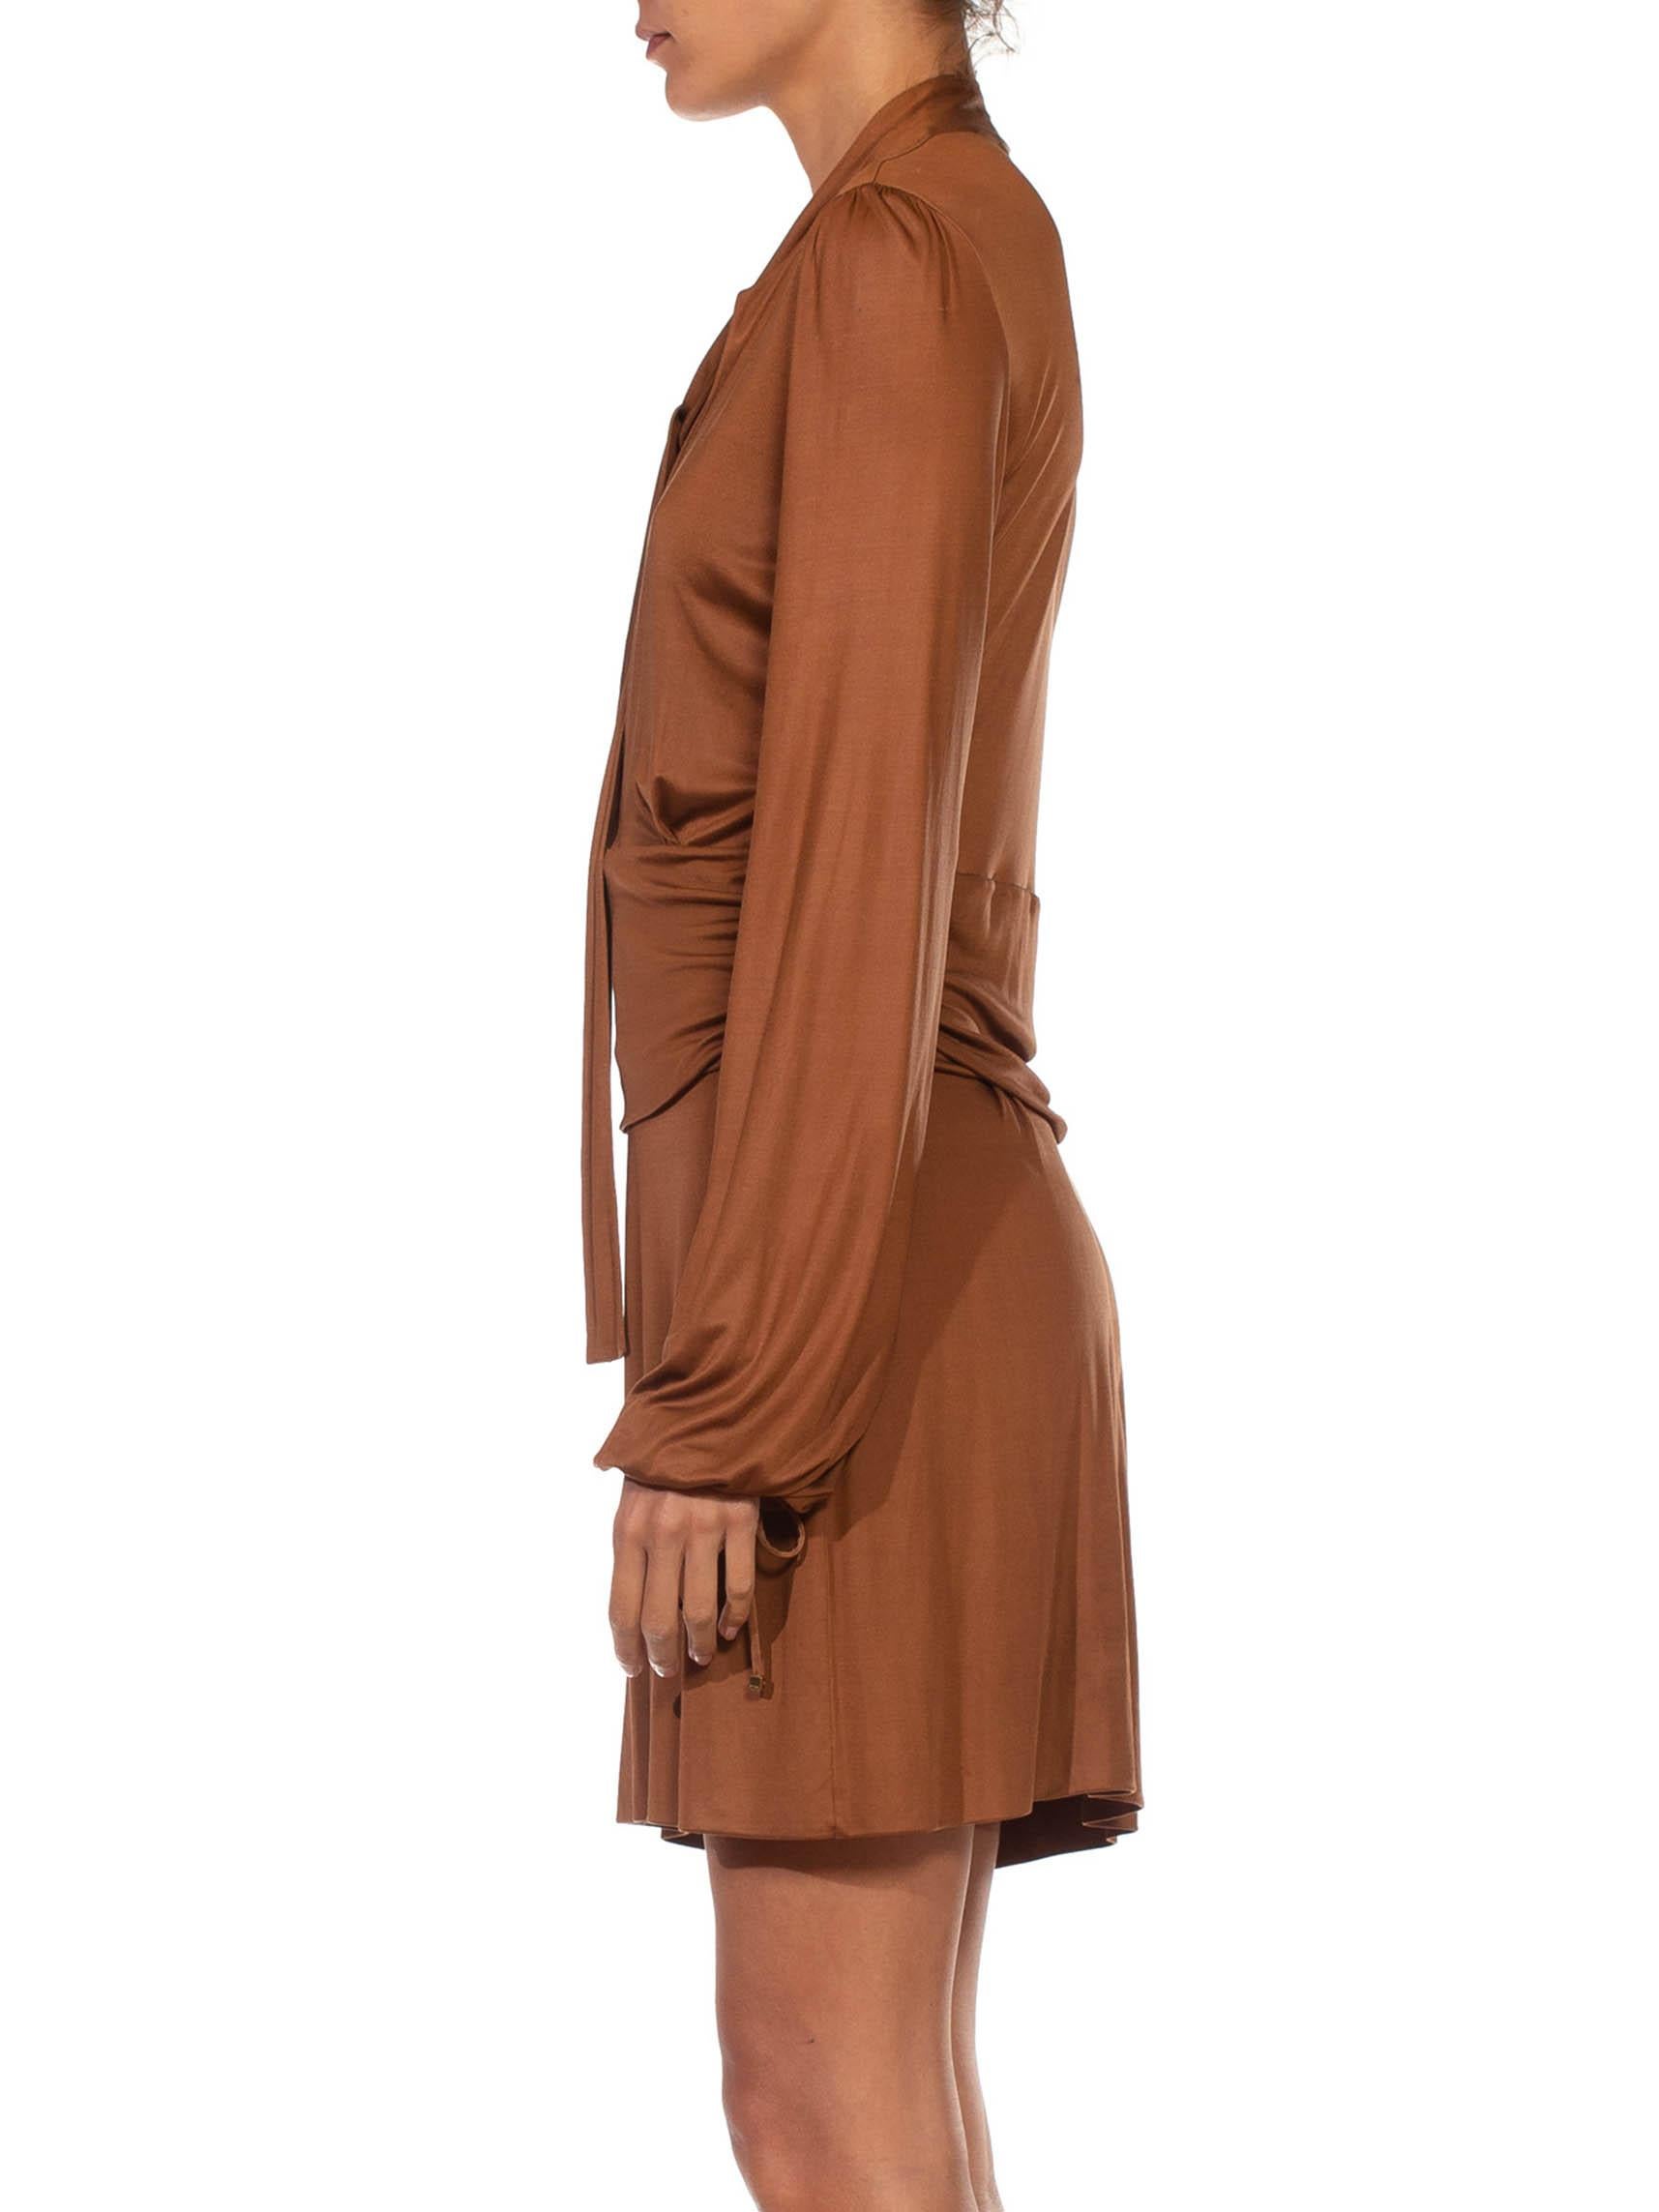 1990S GUCCI Caramel Brown Rayon Jersey Low Cut Mini Cocktail Dress With Sleeves For Sale 1